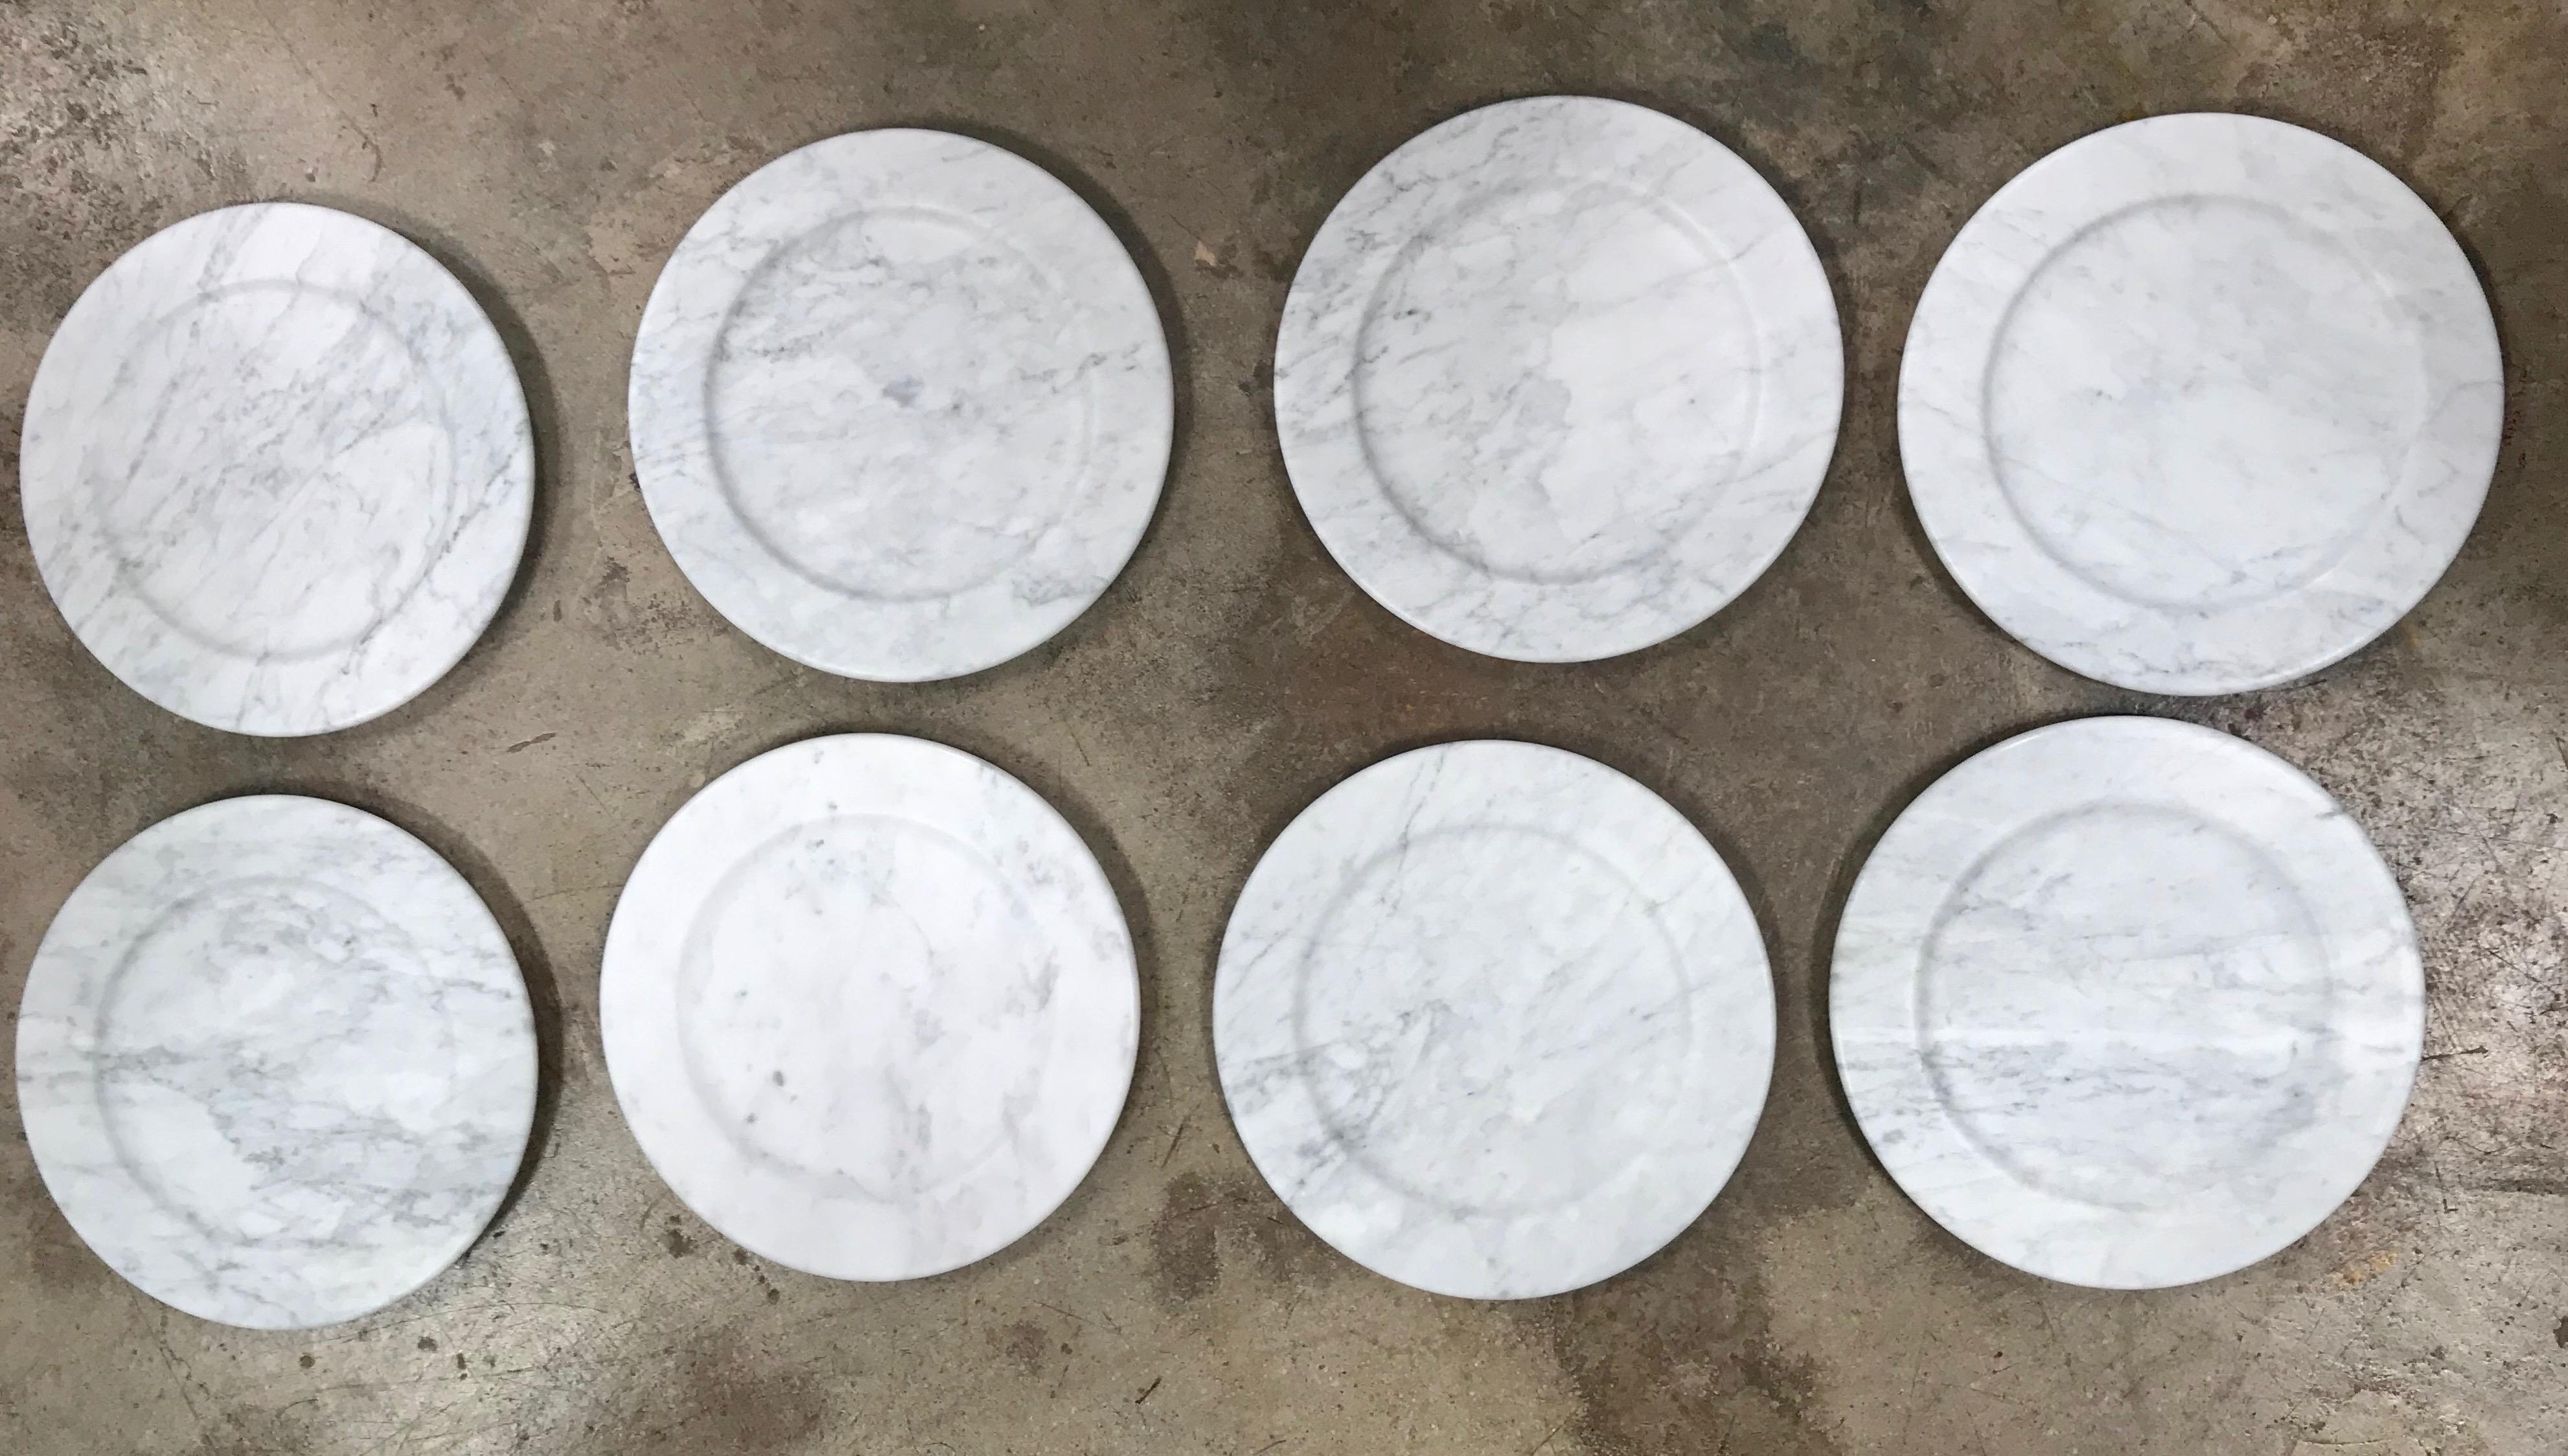 Set of 8 Carrara marble dinner plates or plate, Italy
Every single item is unique and different from the other.
Italian prestigious Carrara marble.